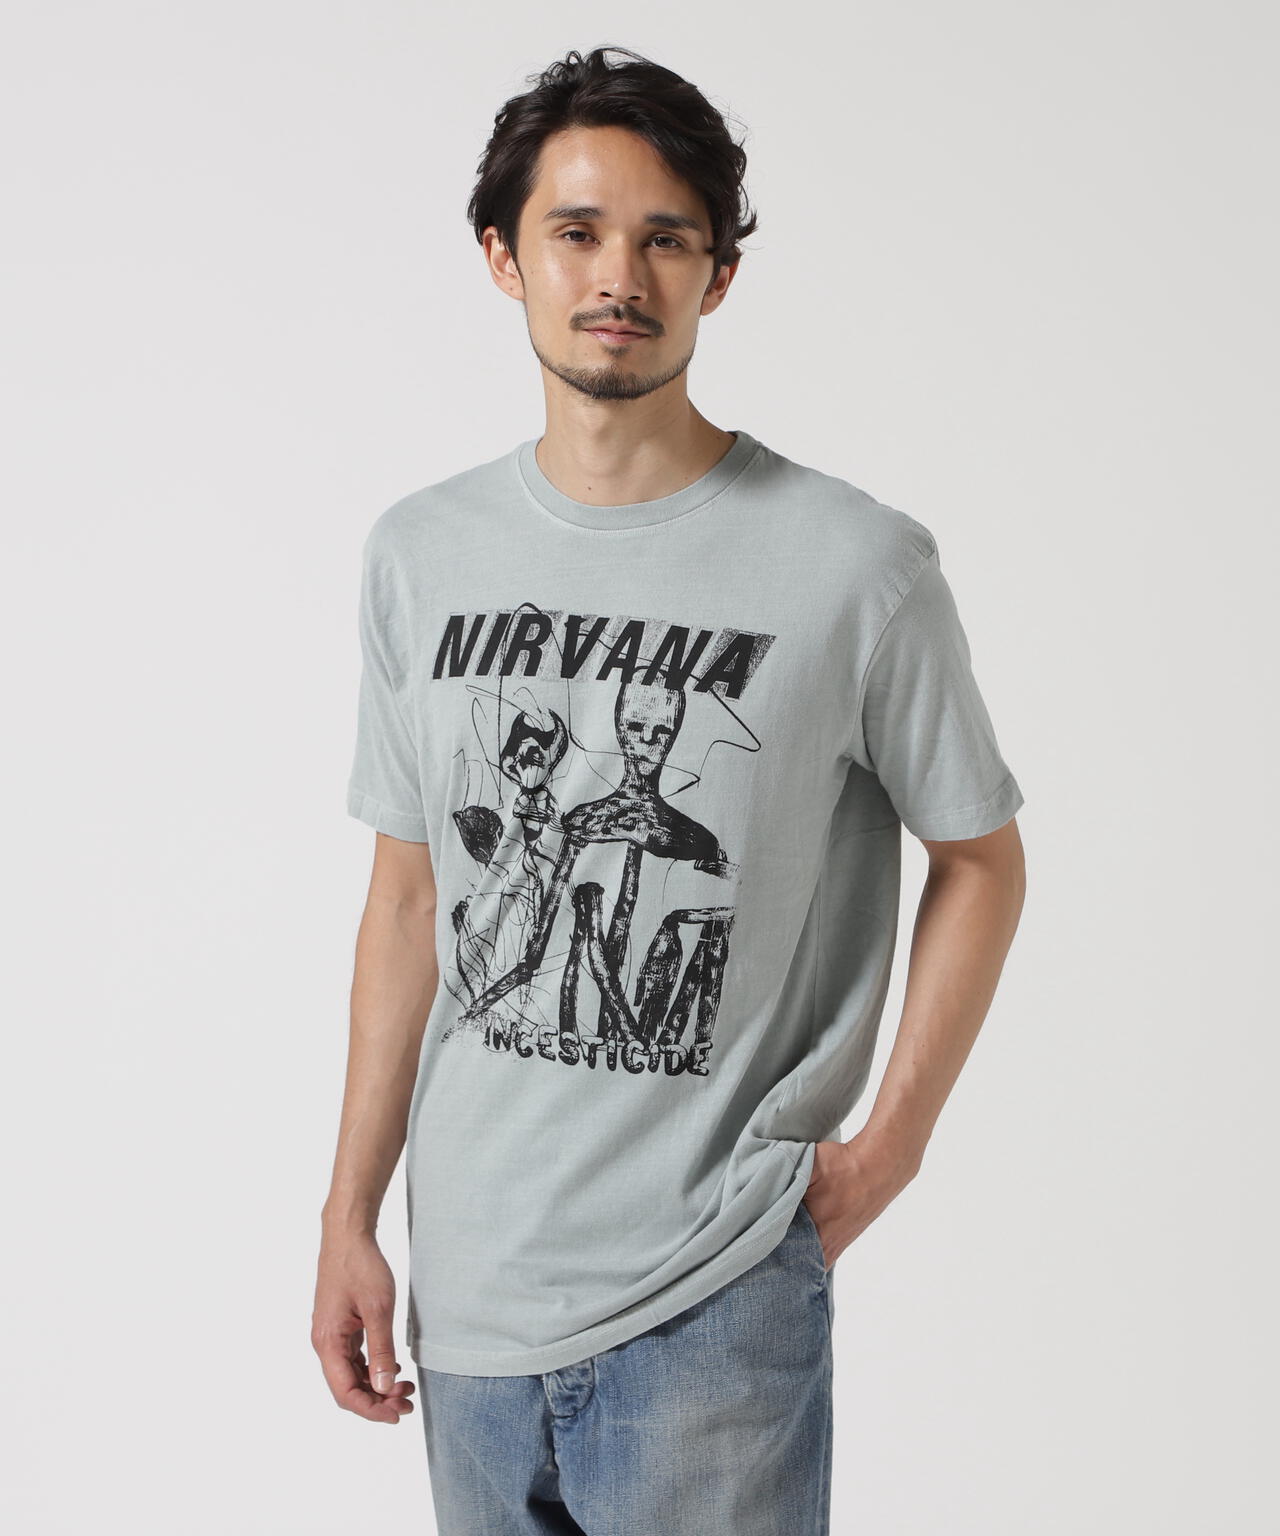 NIRVANA/ニルヴァーナ INCESTICIDE STACKED LOGO S/S TEE | BEAVER 